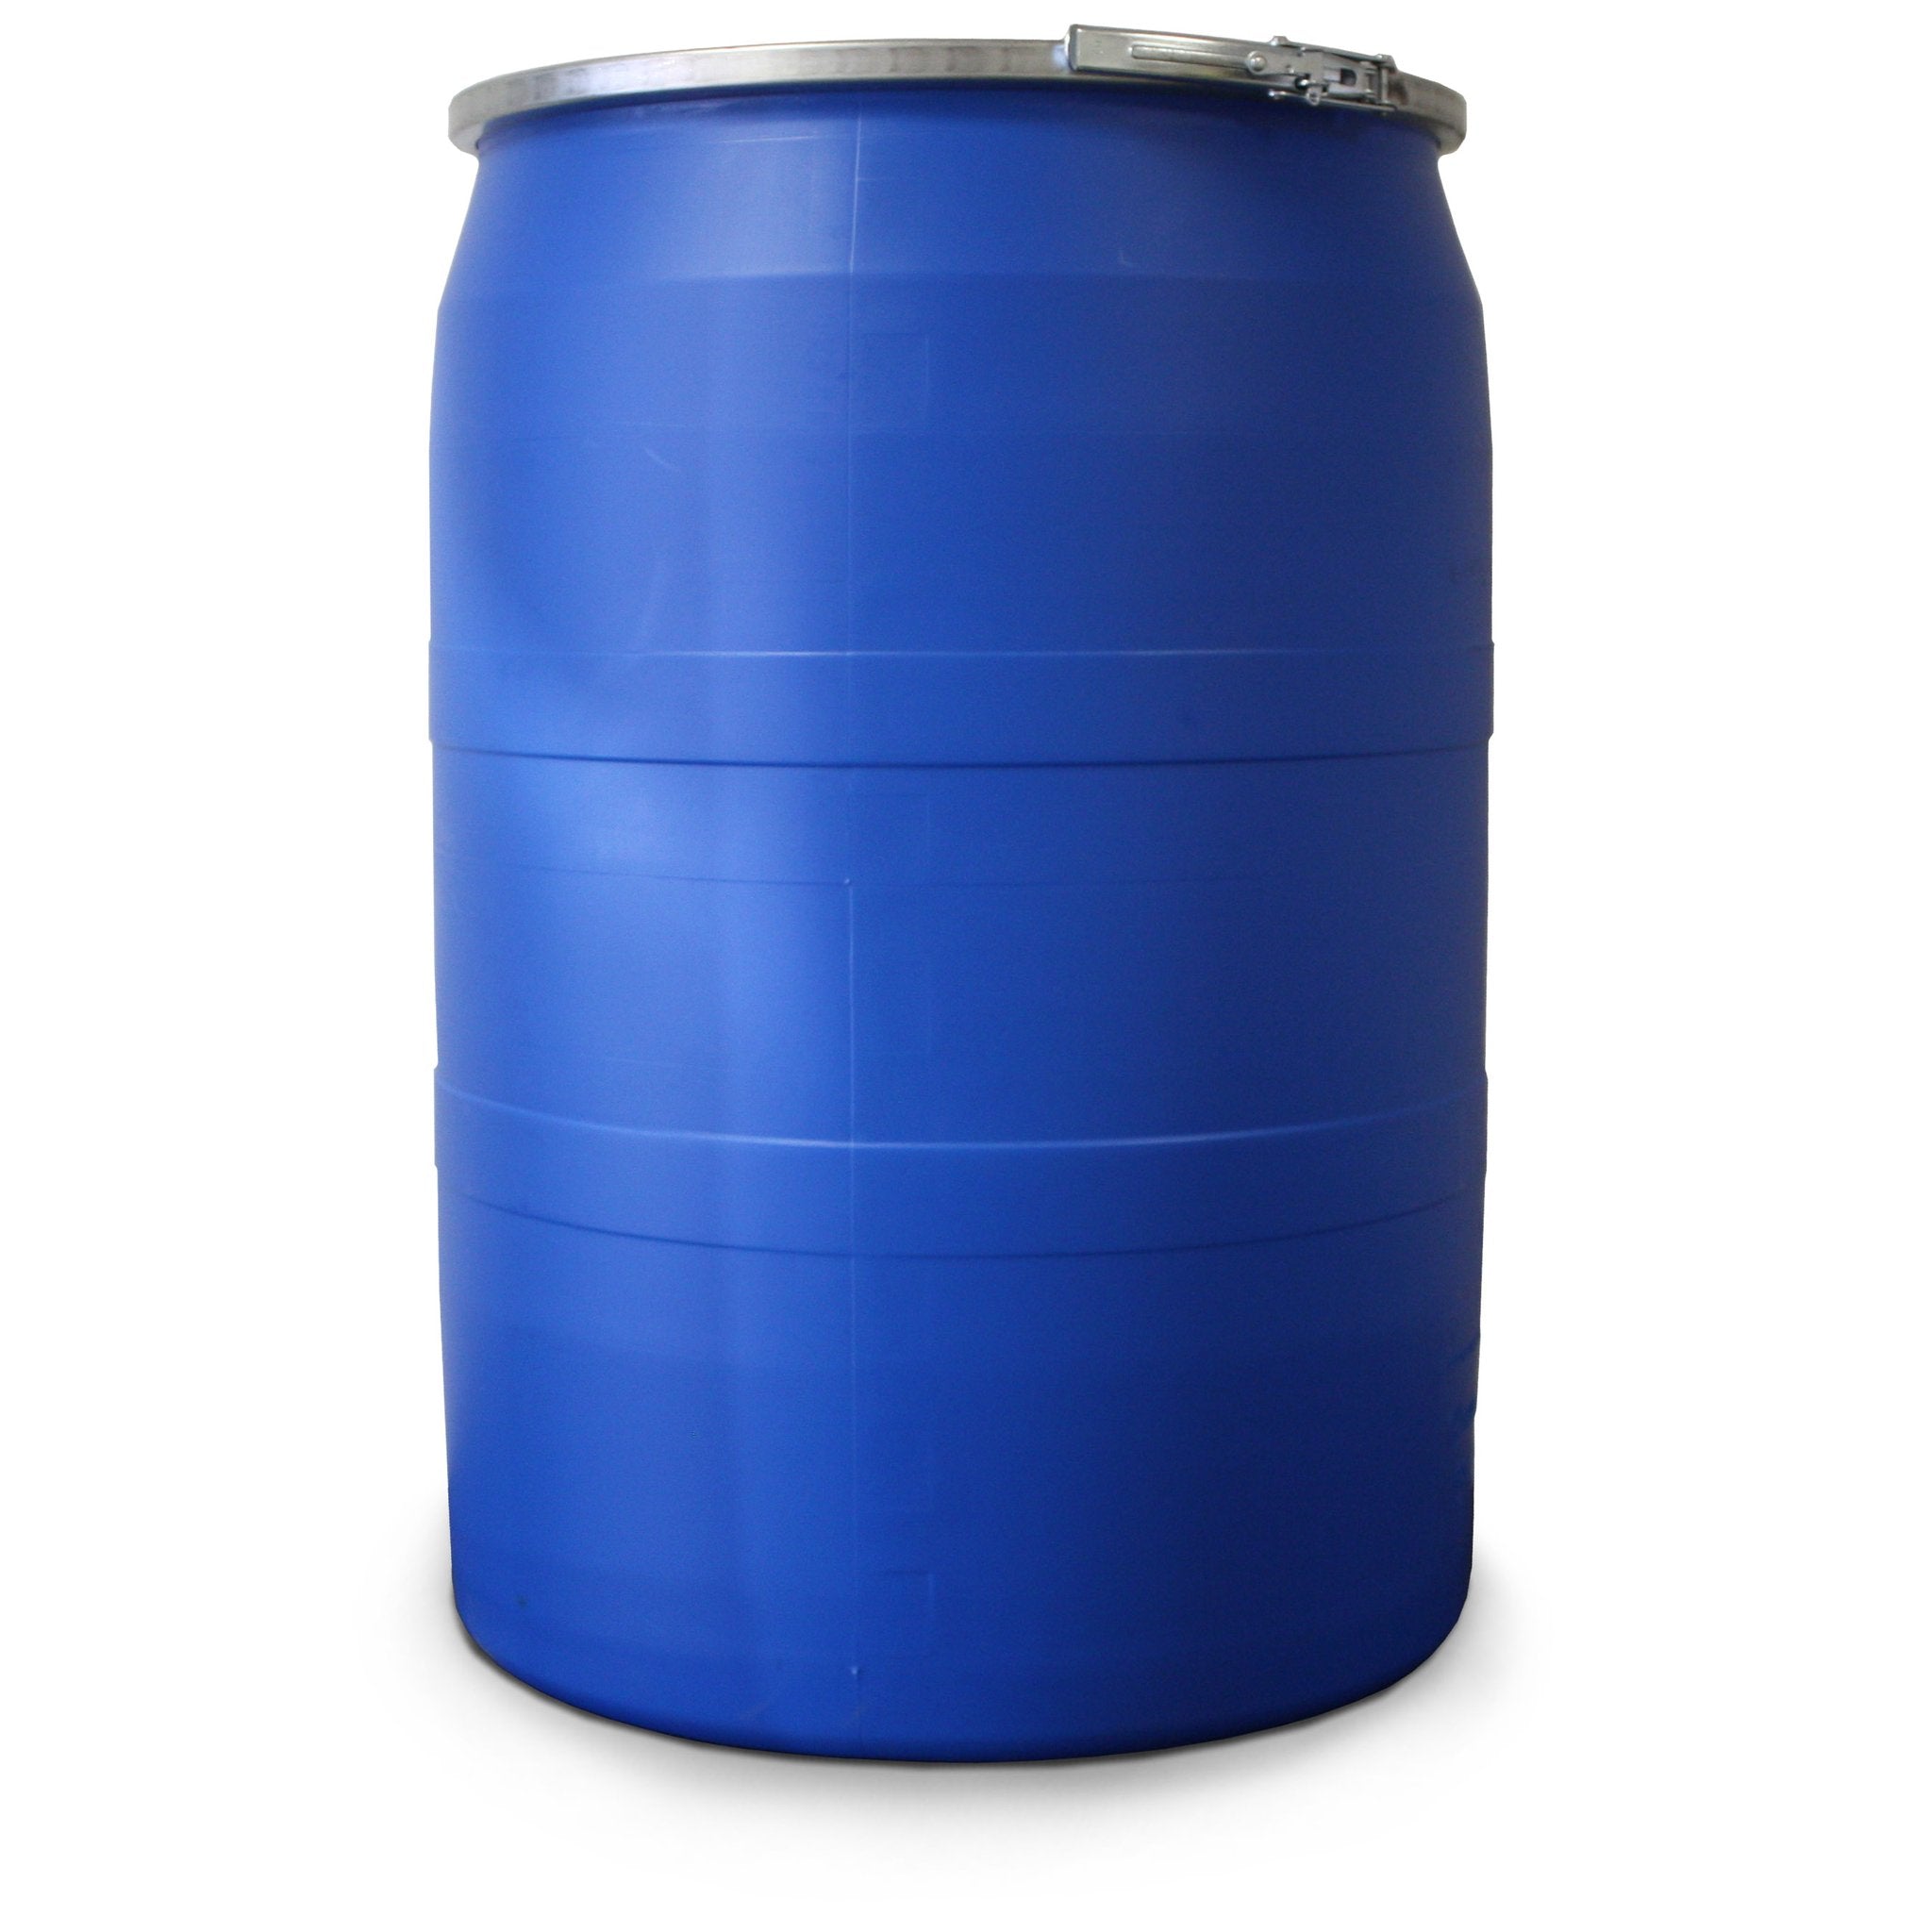 XSORB Oil Select 55 gal Drum - 1 DRUM-eSafety Supplies, Inc